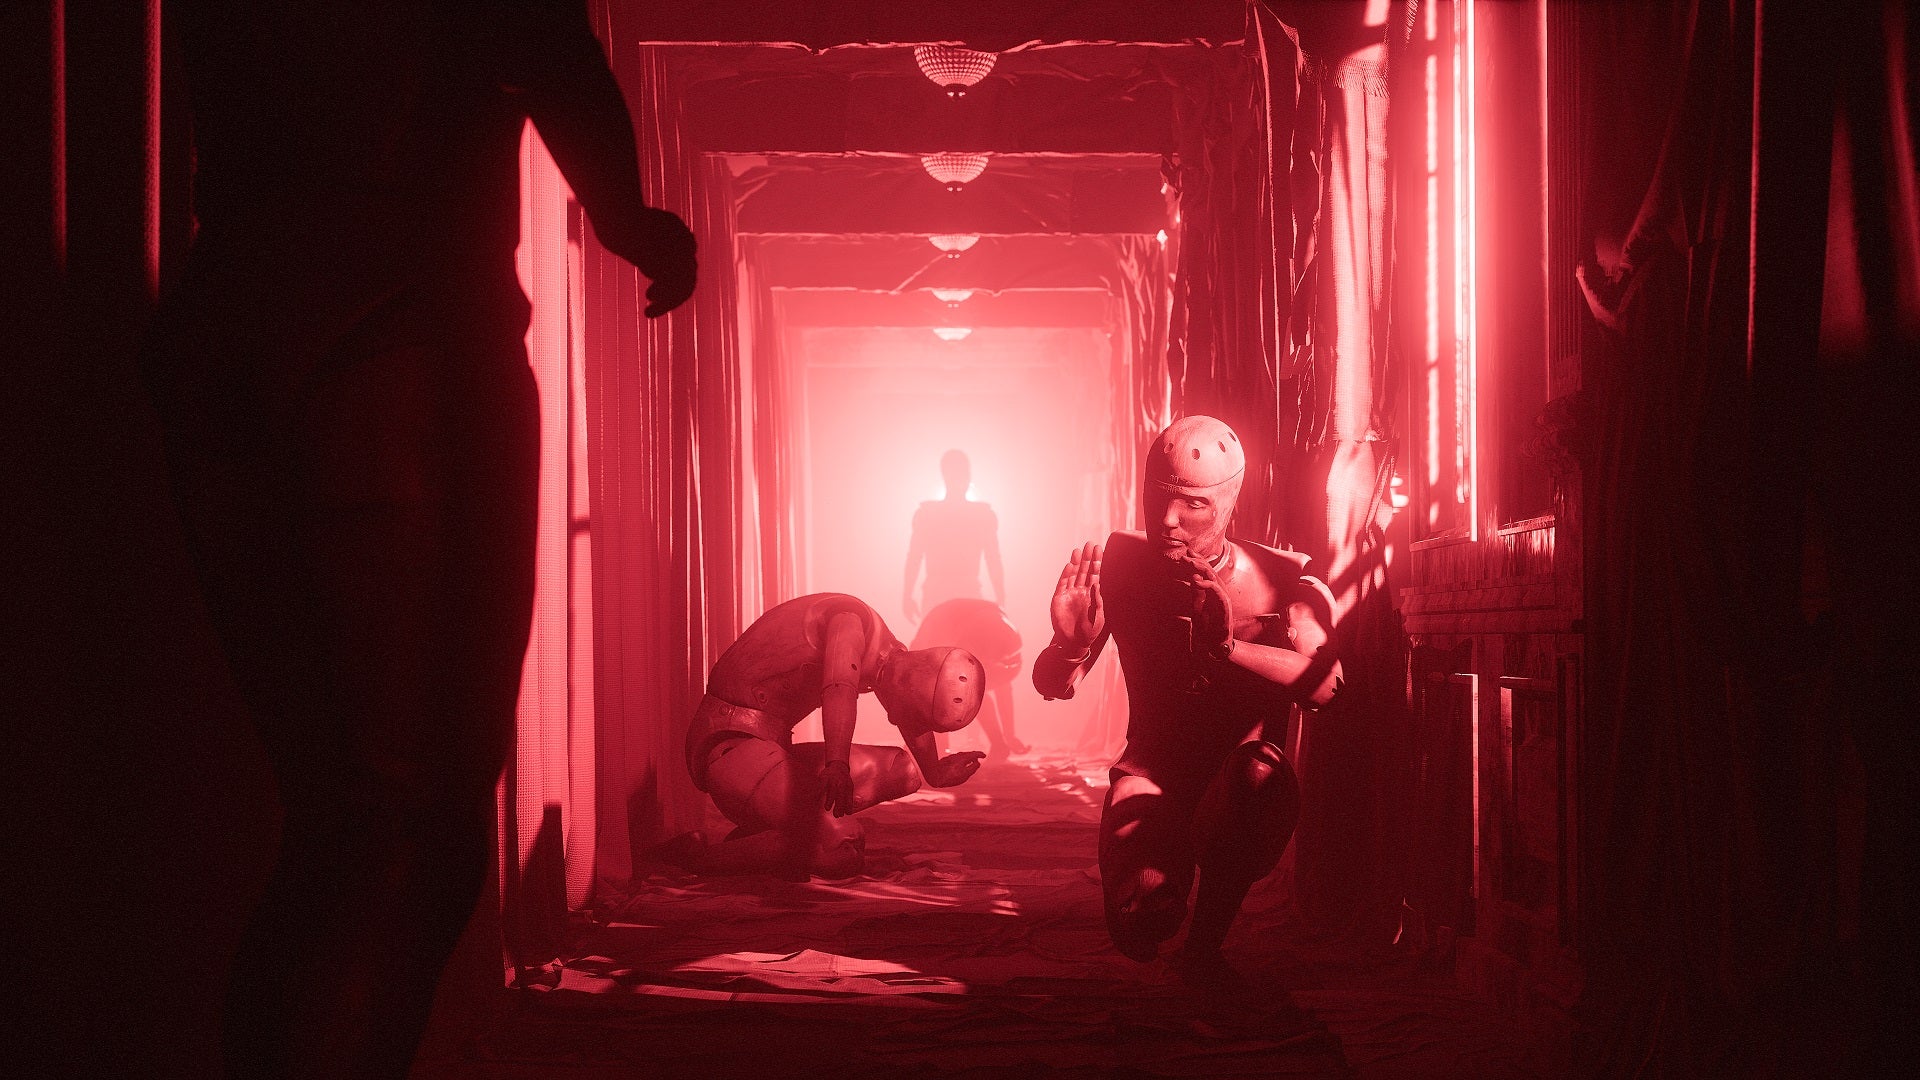 In an entirely red-lit corridor, several mannequins cower in poses of fear and submission. Two more humanoid figures can be seen standing at either end of the corridor in more confident poses, although it's hard to say if they're mannequin or human.